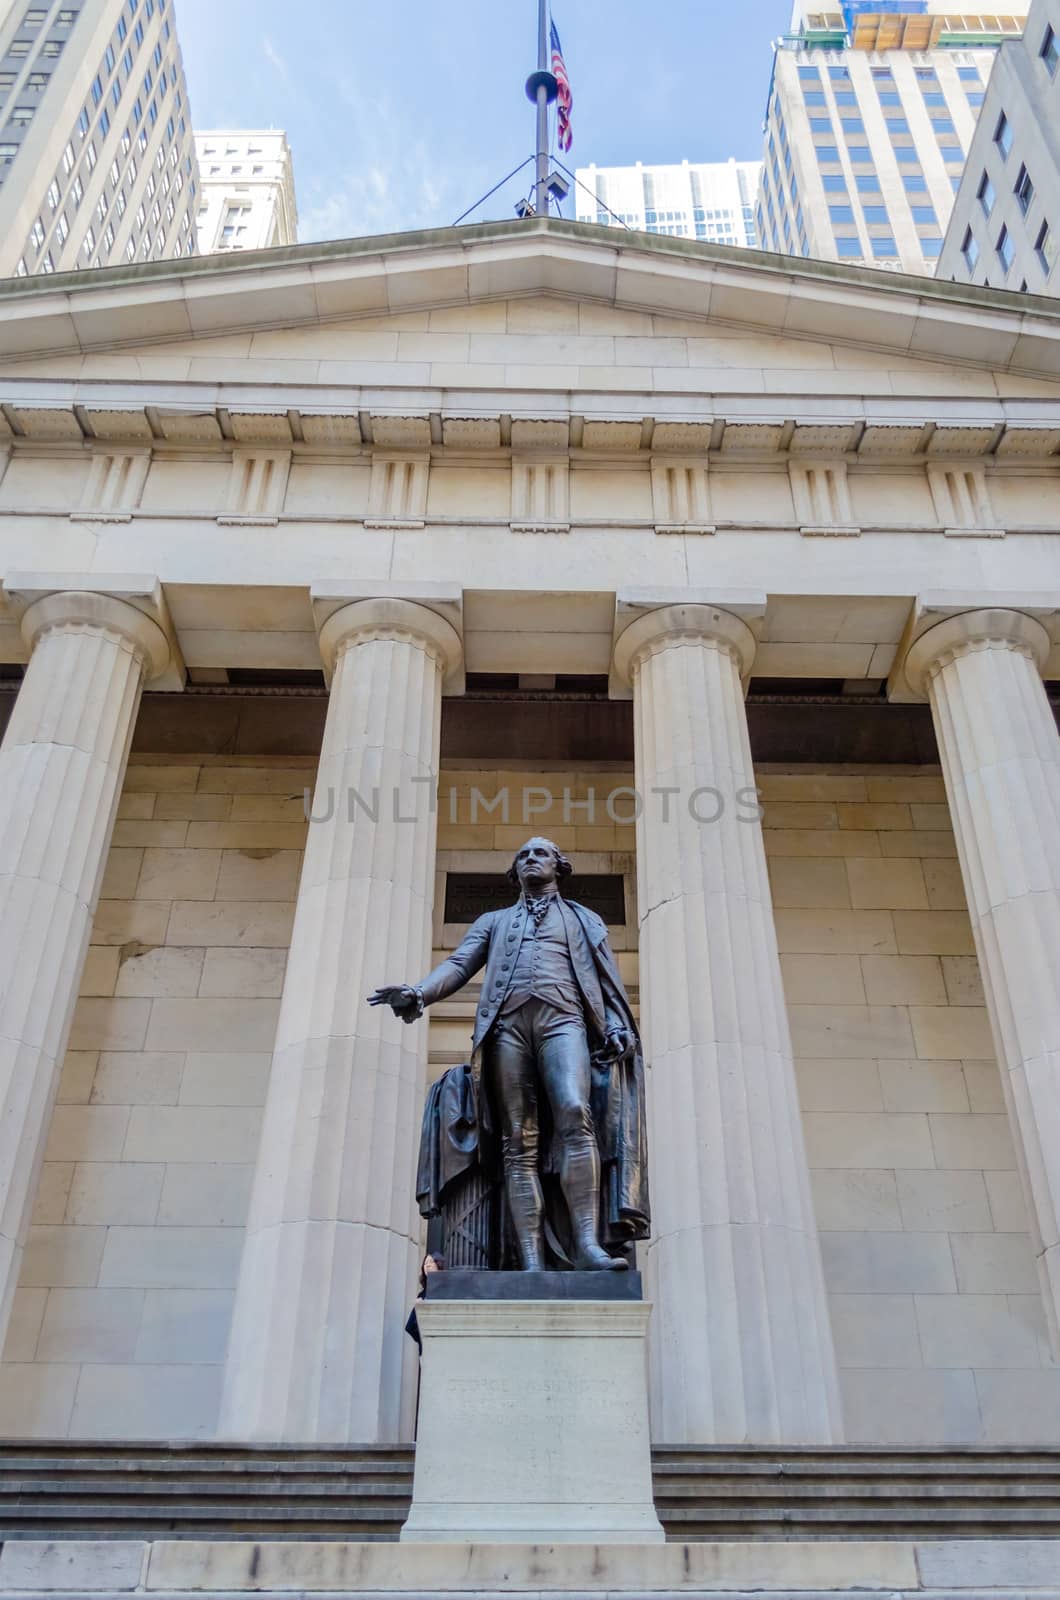 Facade of the Federal Hall with Washington Statue on the front, Manhattan, New York City